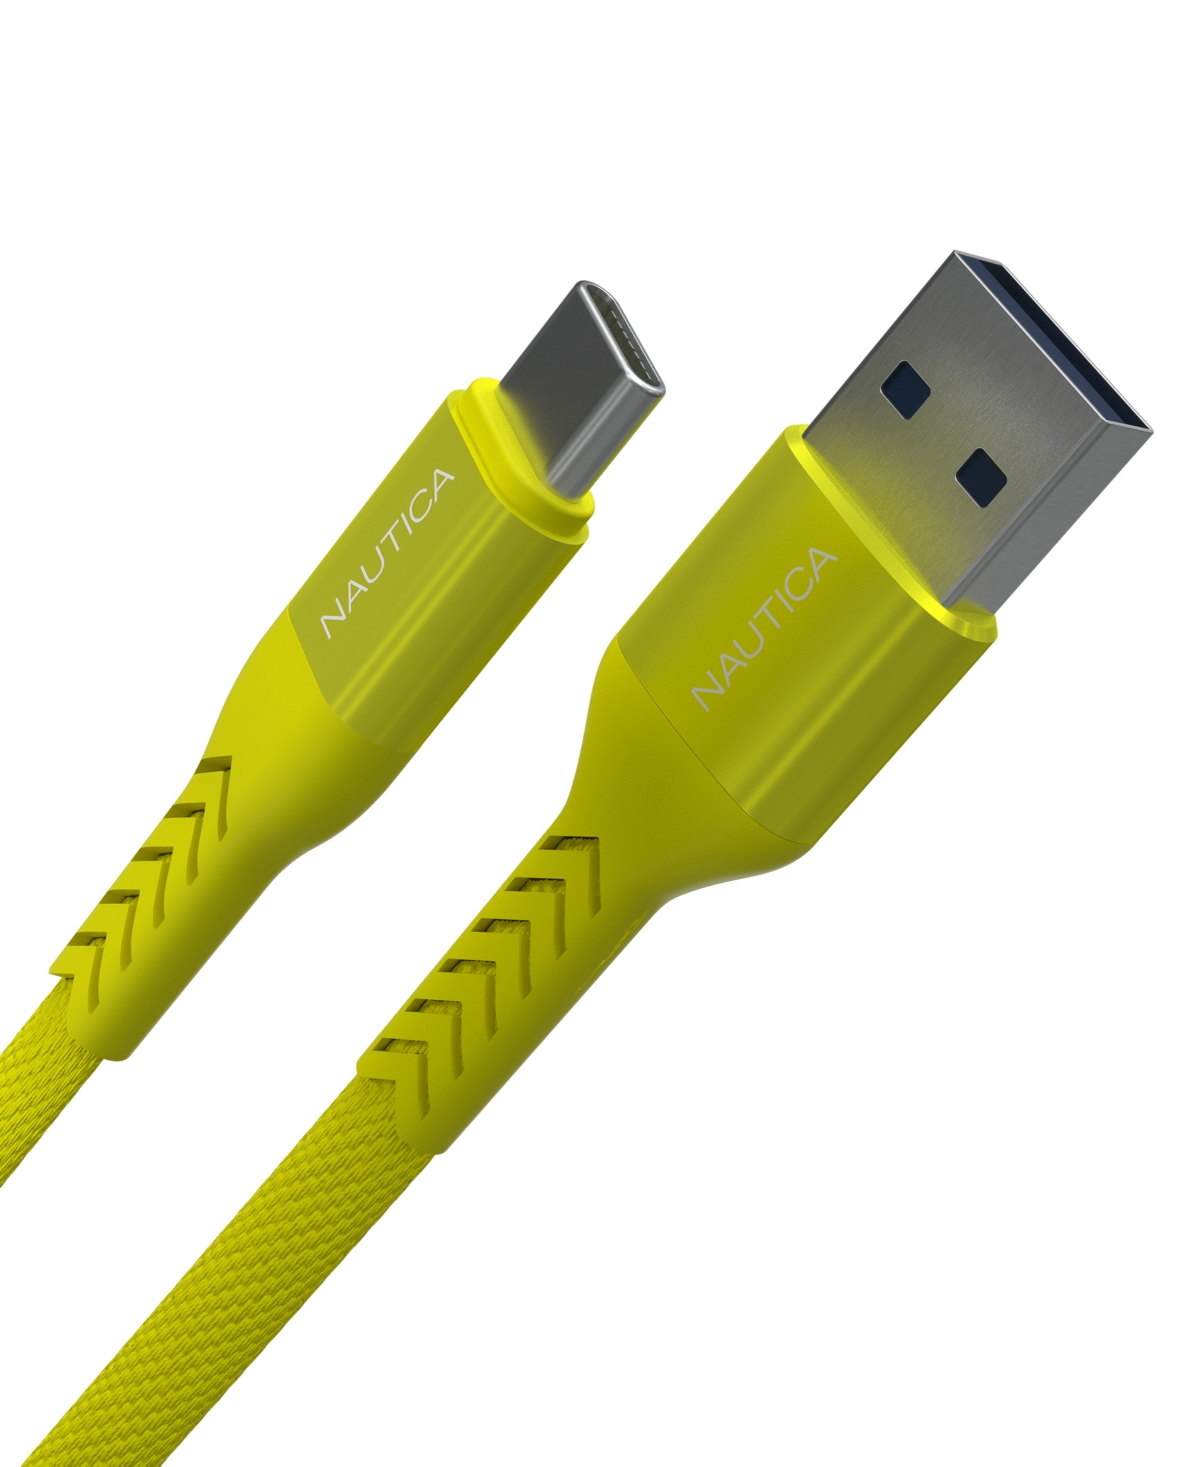 NAUTICA C20 USB C TO USB A CABLE, 4'